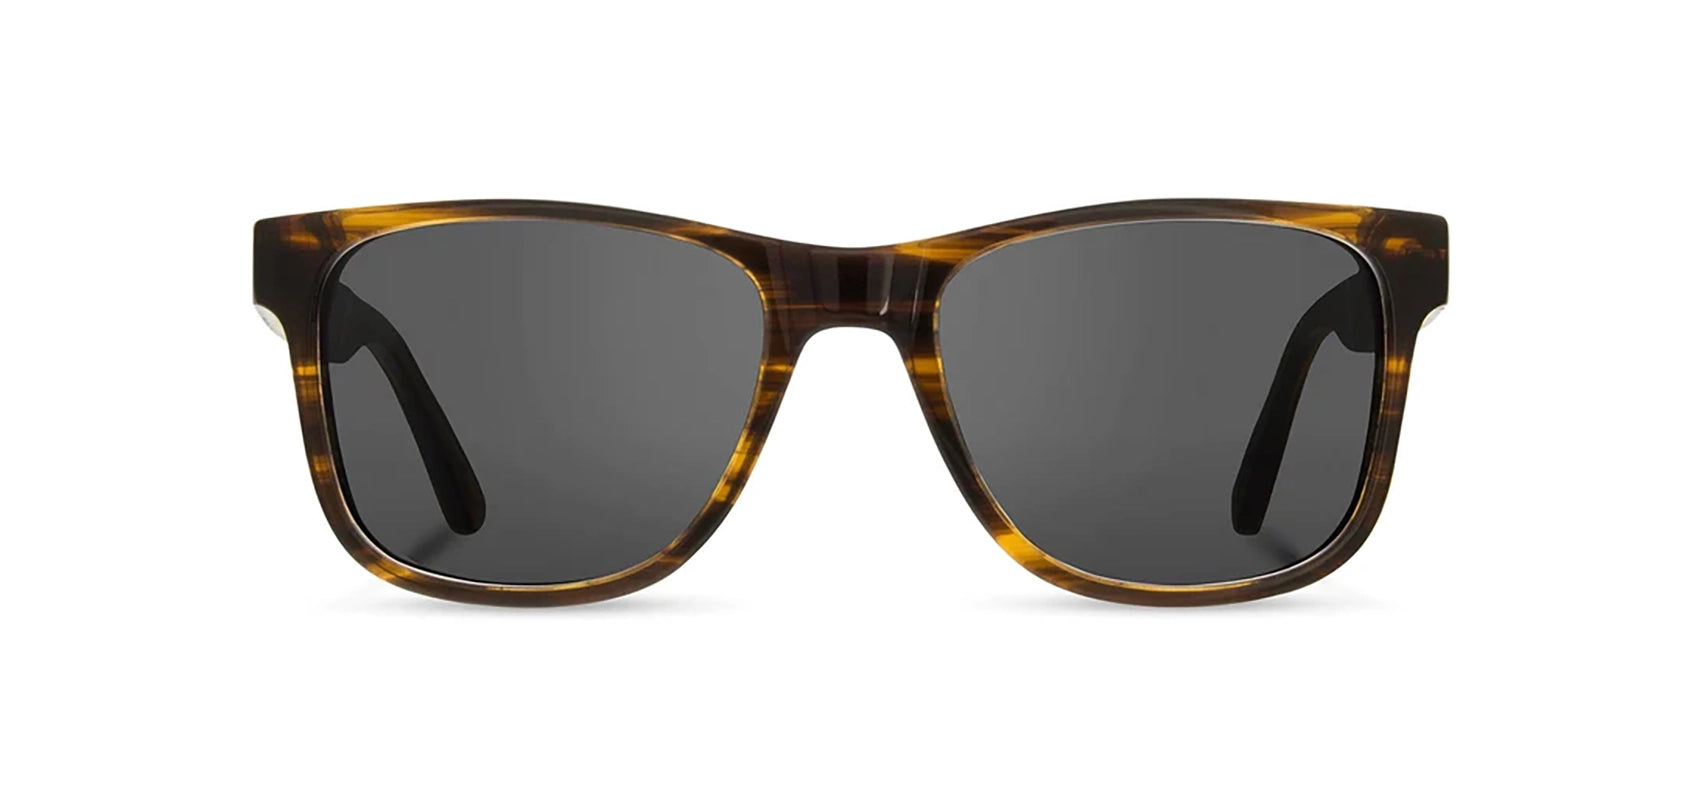 Camp trail Sunglasses with Tortoise/Walnut Frames and Grey Polarized lenses, front  view